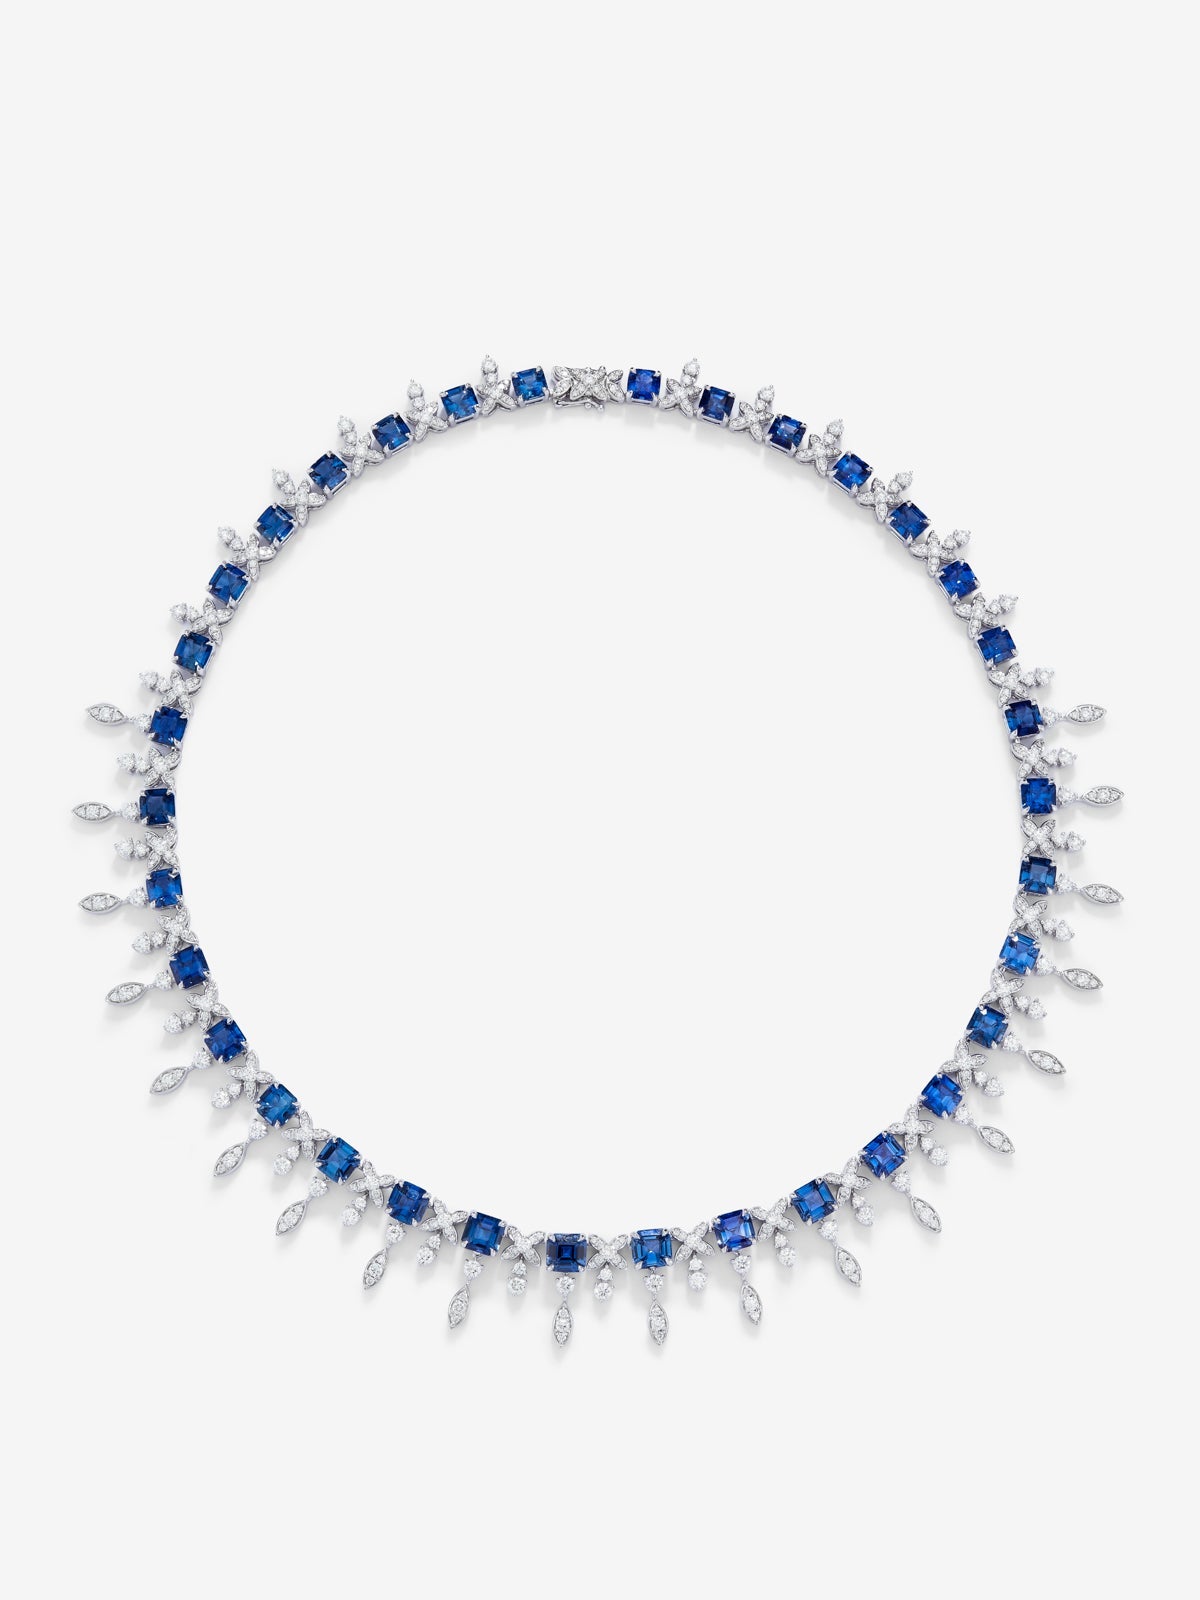 18K white gold necklace with 34 octagonal-cut blue sapphires with a total of 40.98 cts and 460 brilliant-cut diamonds with a total of 9.48 cts